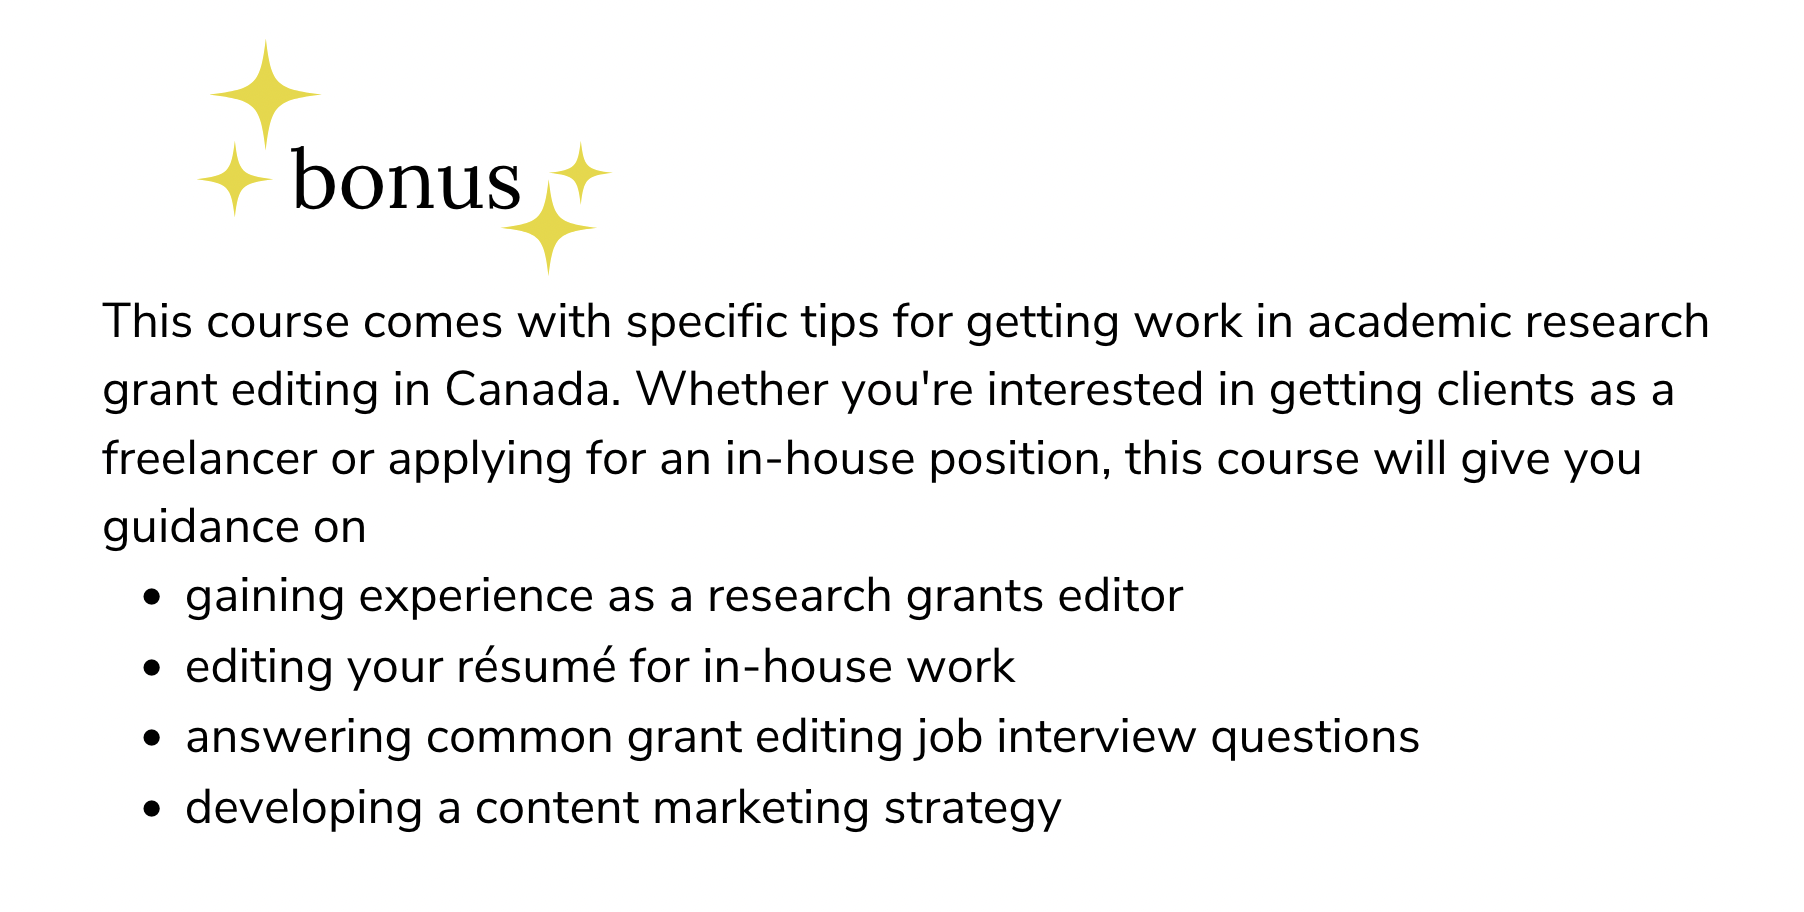 Bonus:  This course comes with specific tips for getting work in academic research grant editing in Canada. Whether you&#39;re interested in getting clients as a freelancer or applying for an in-house position, this course will give you guidance on gaining experience as a research grants editor editing your résumé for in-house work answering common grant editing job interview questions developing a content marketing strategy